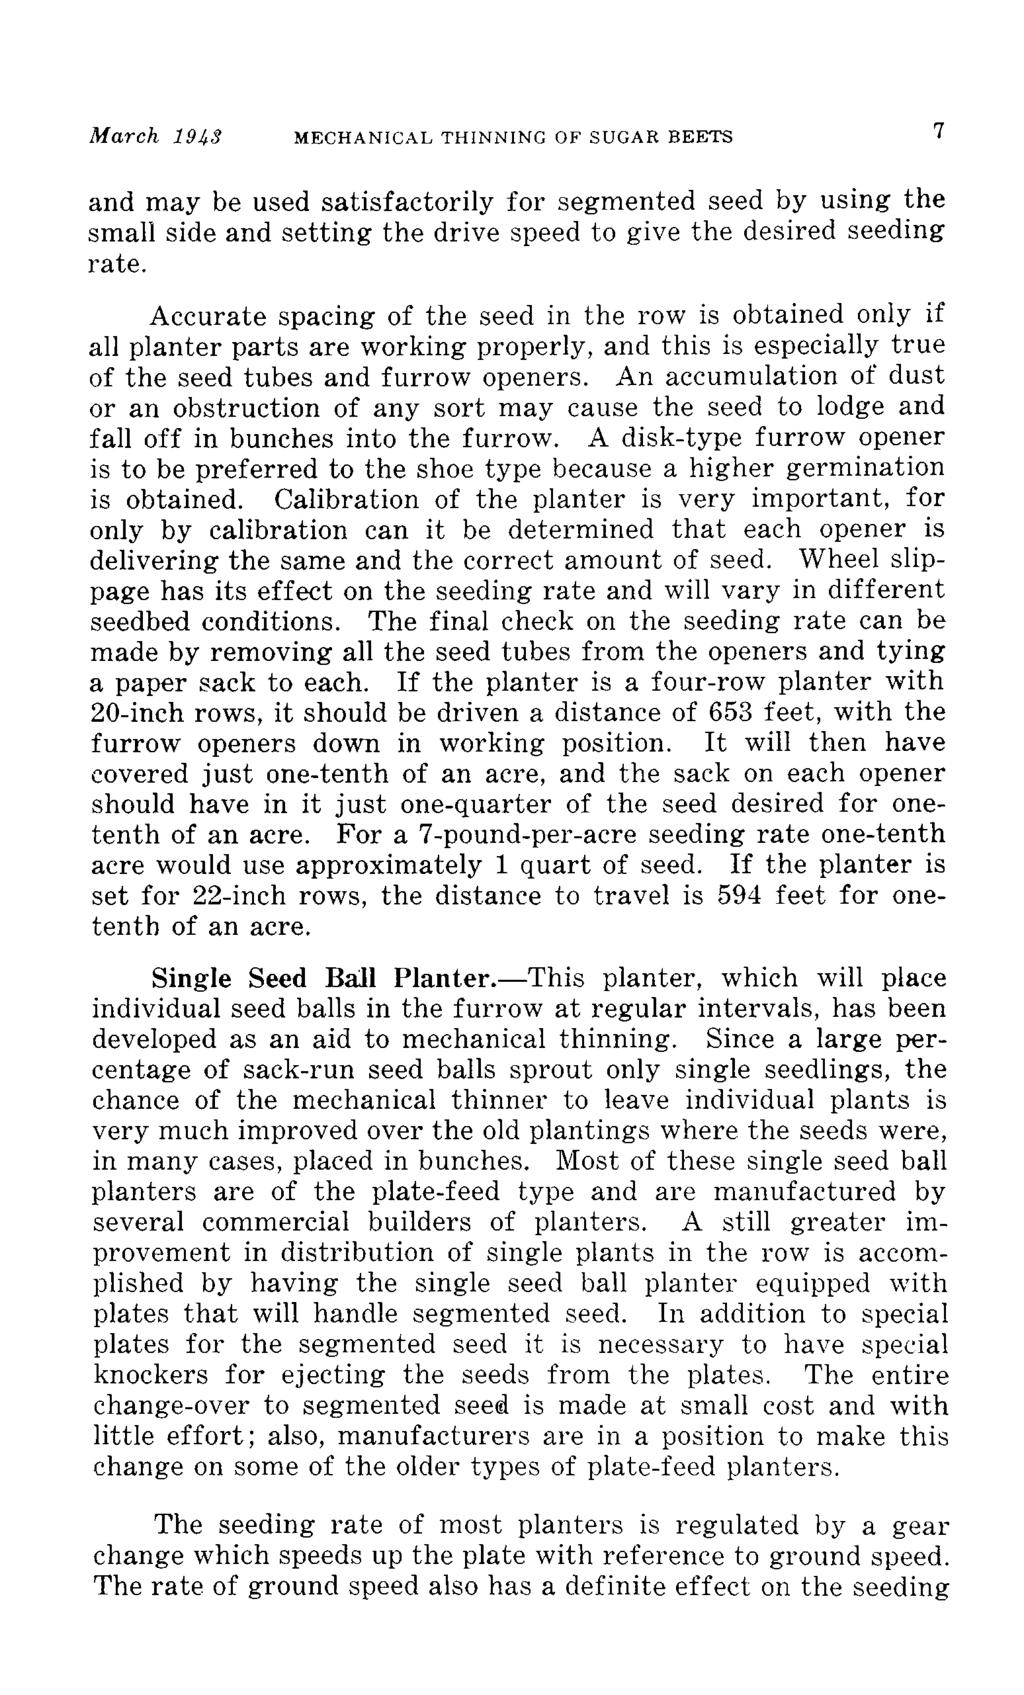 March 1943 MECHANICAL THINNING OF SUGAR BEETS 7 and may be used satisfactorily for segmented seed by using the small side and setting the drive speed to give the desired seeding rate.